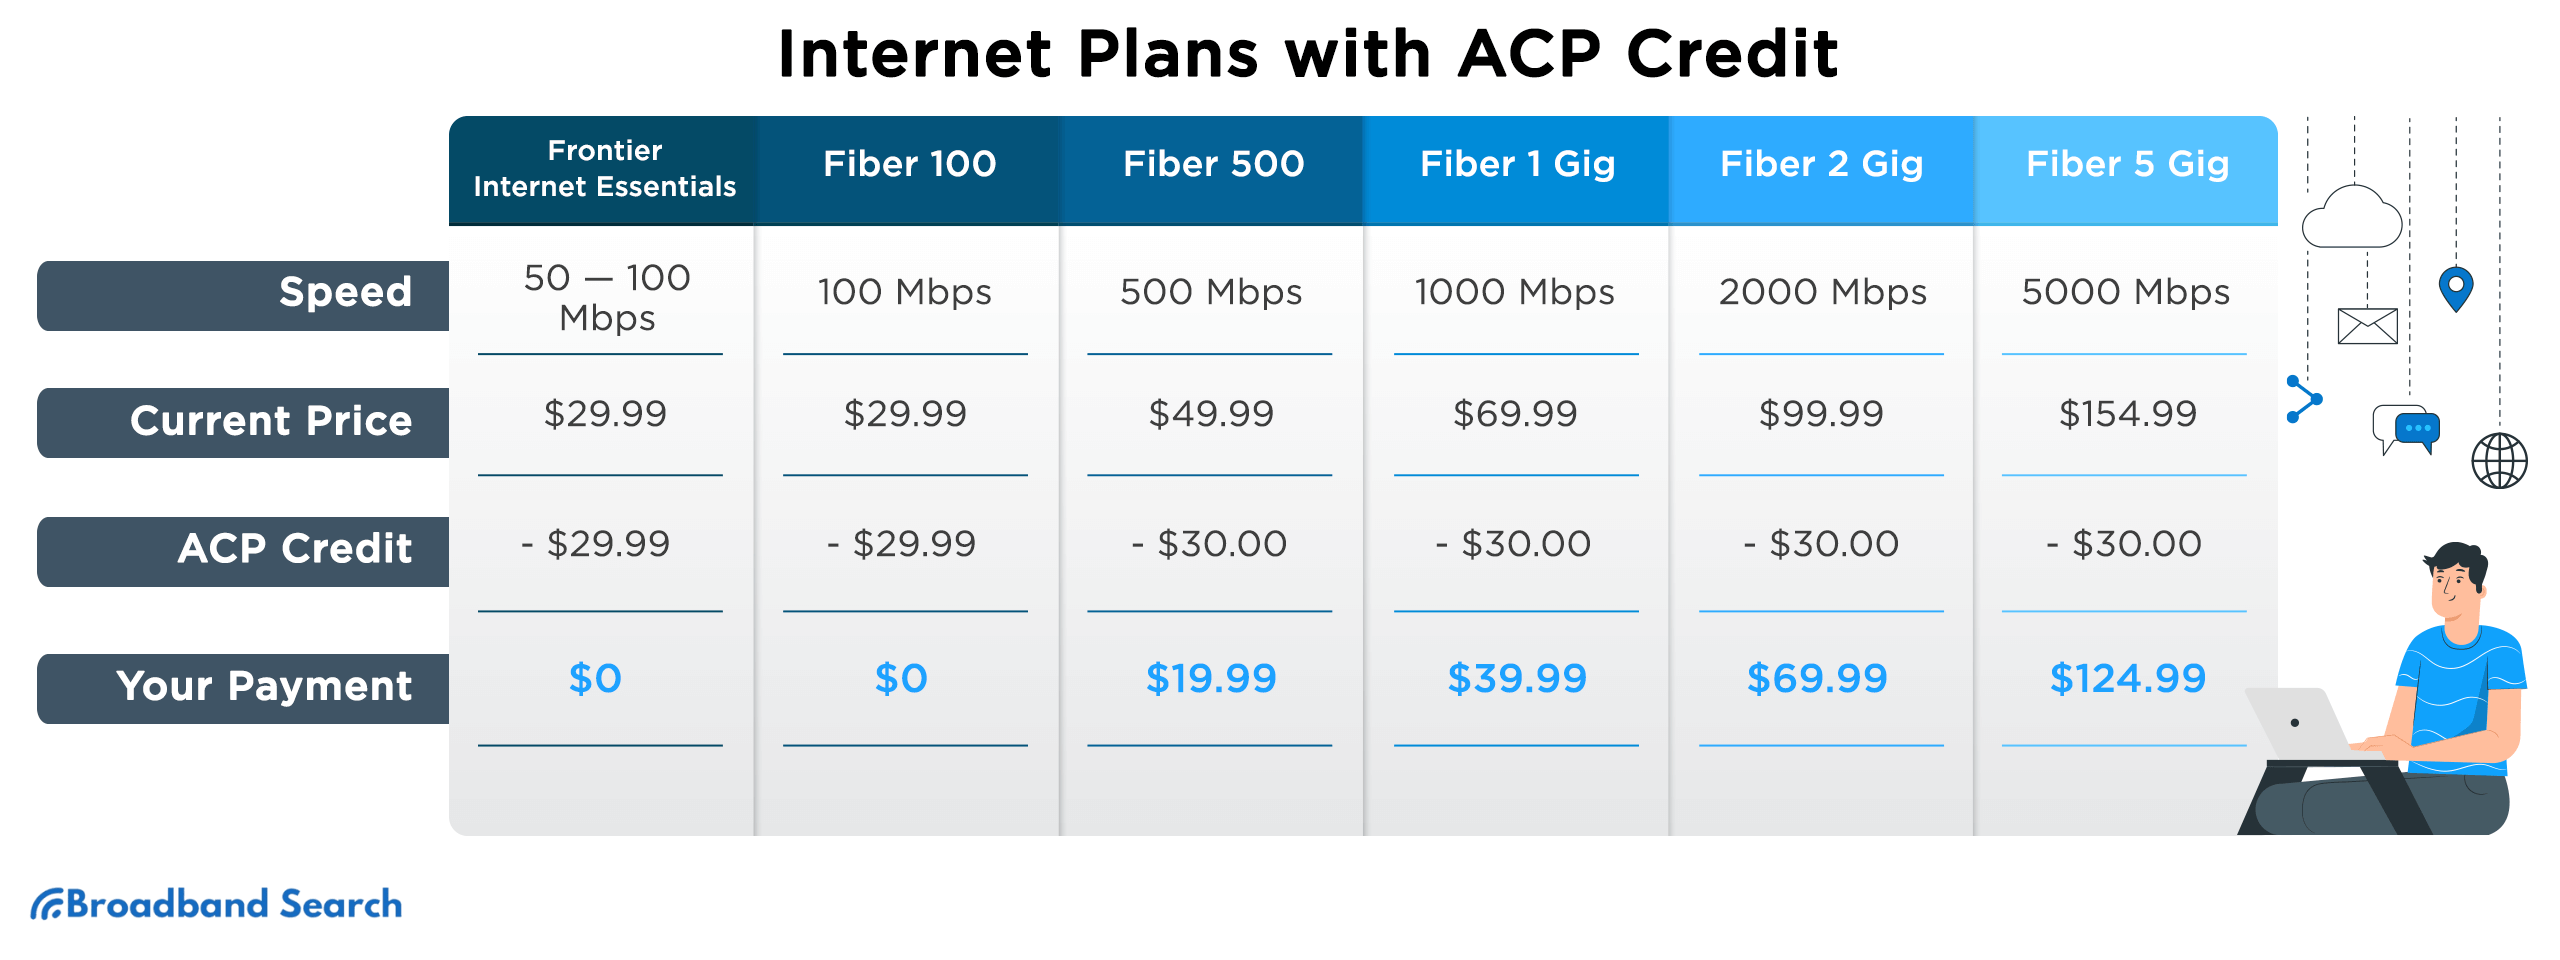 Internet Plans with ACP Credit